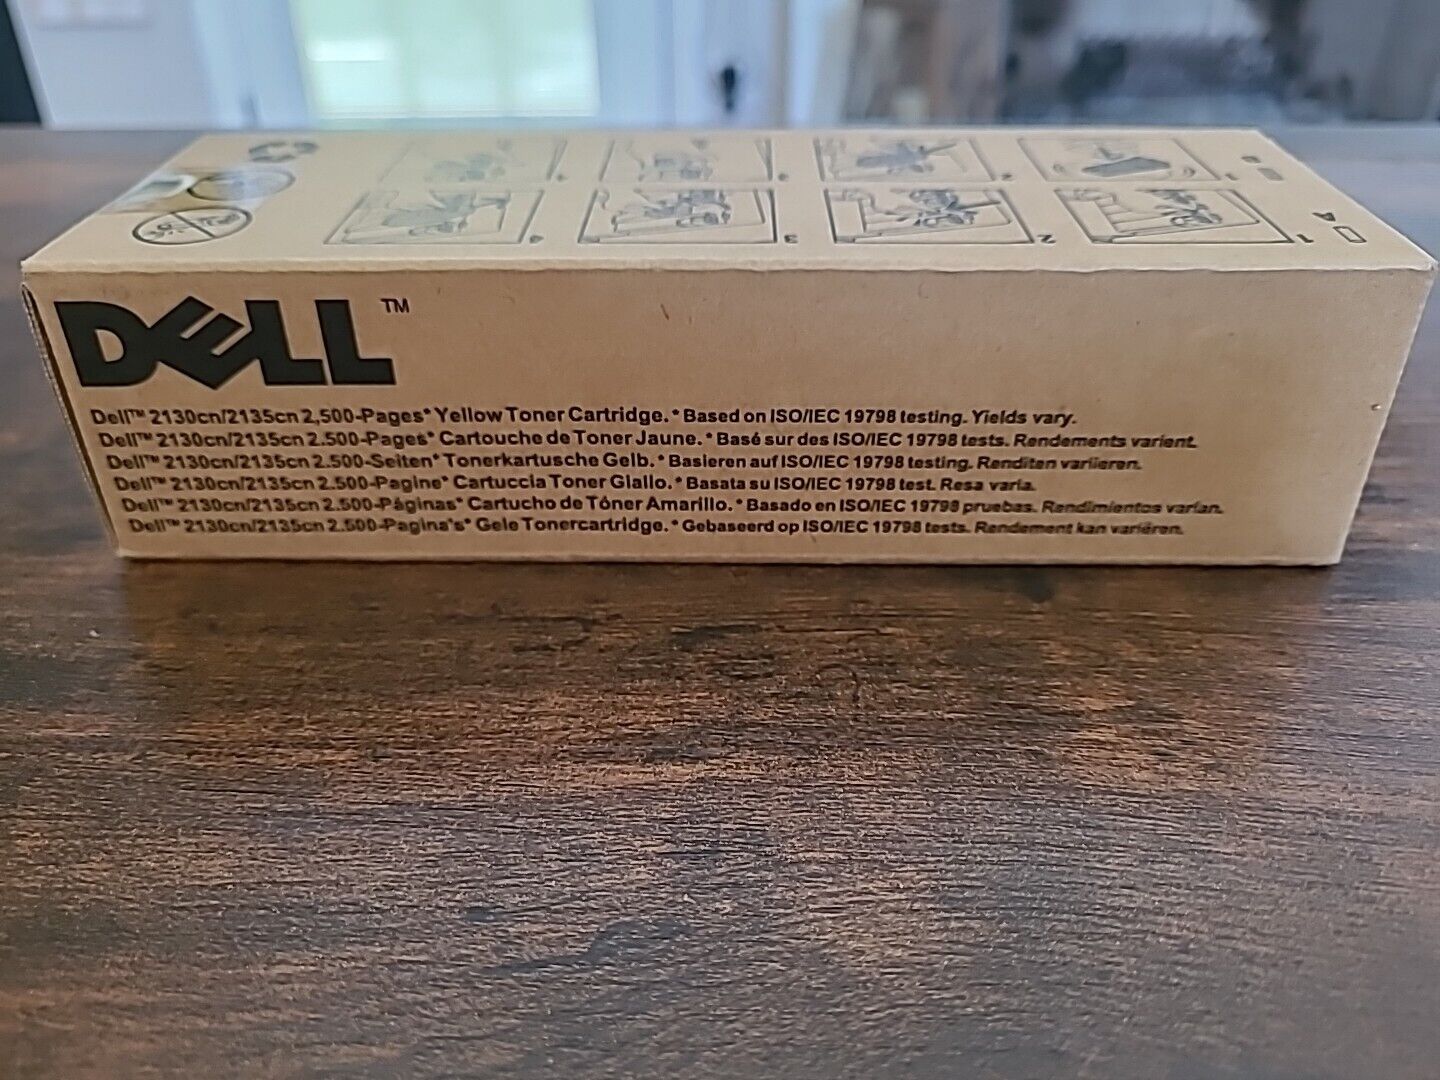 New Genuine  Dell 2130CN/2135CN  Yellow Toner Cartridge CT201183 2500 Pages.  